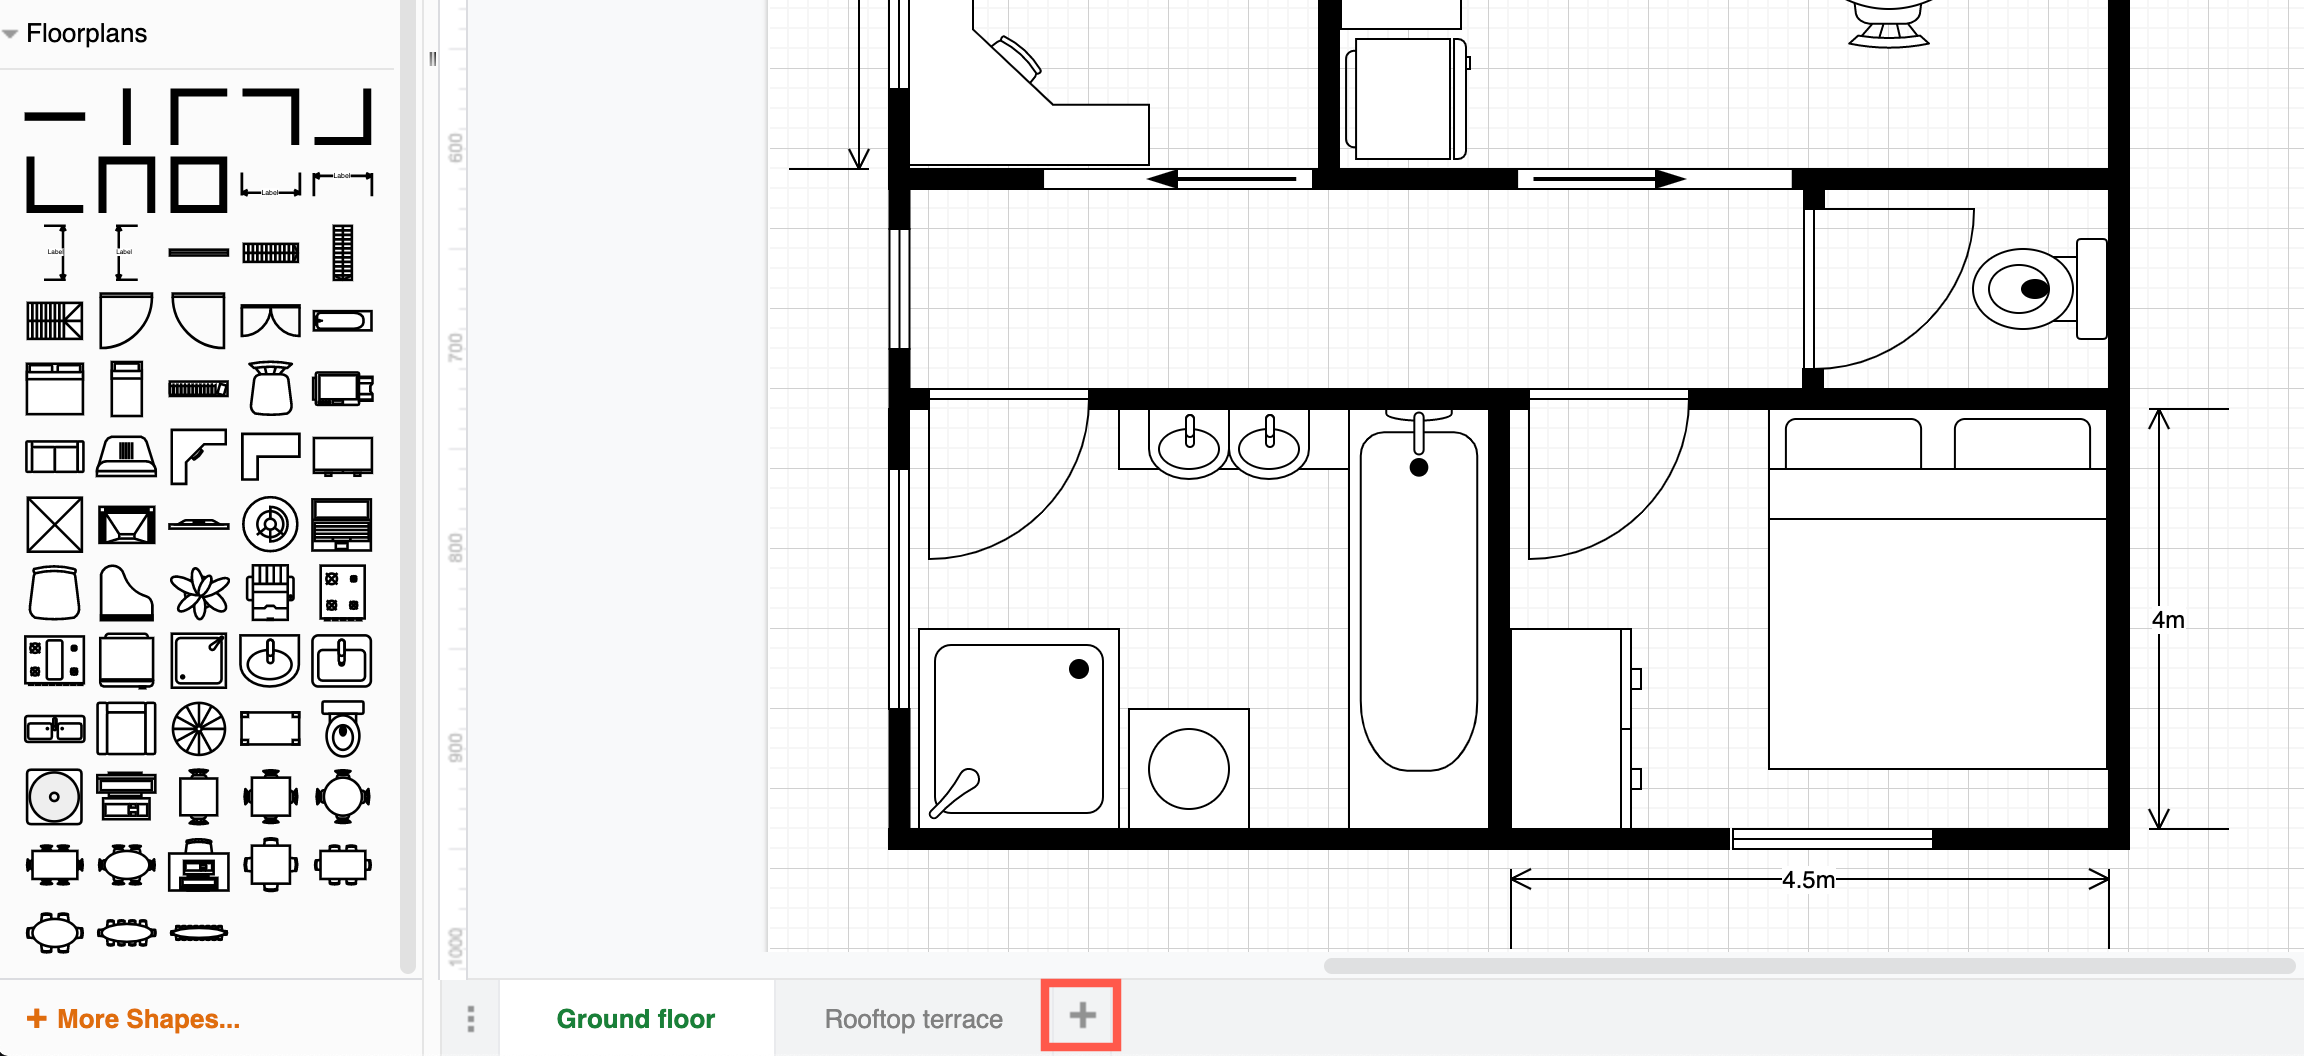 Add a new page to a complex floorplan in draw.io